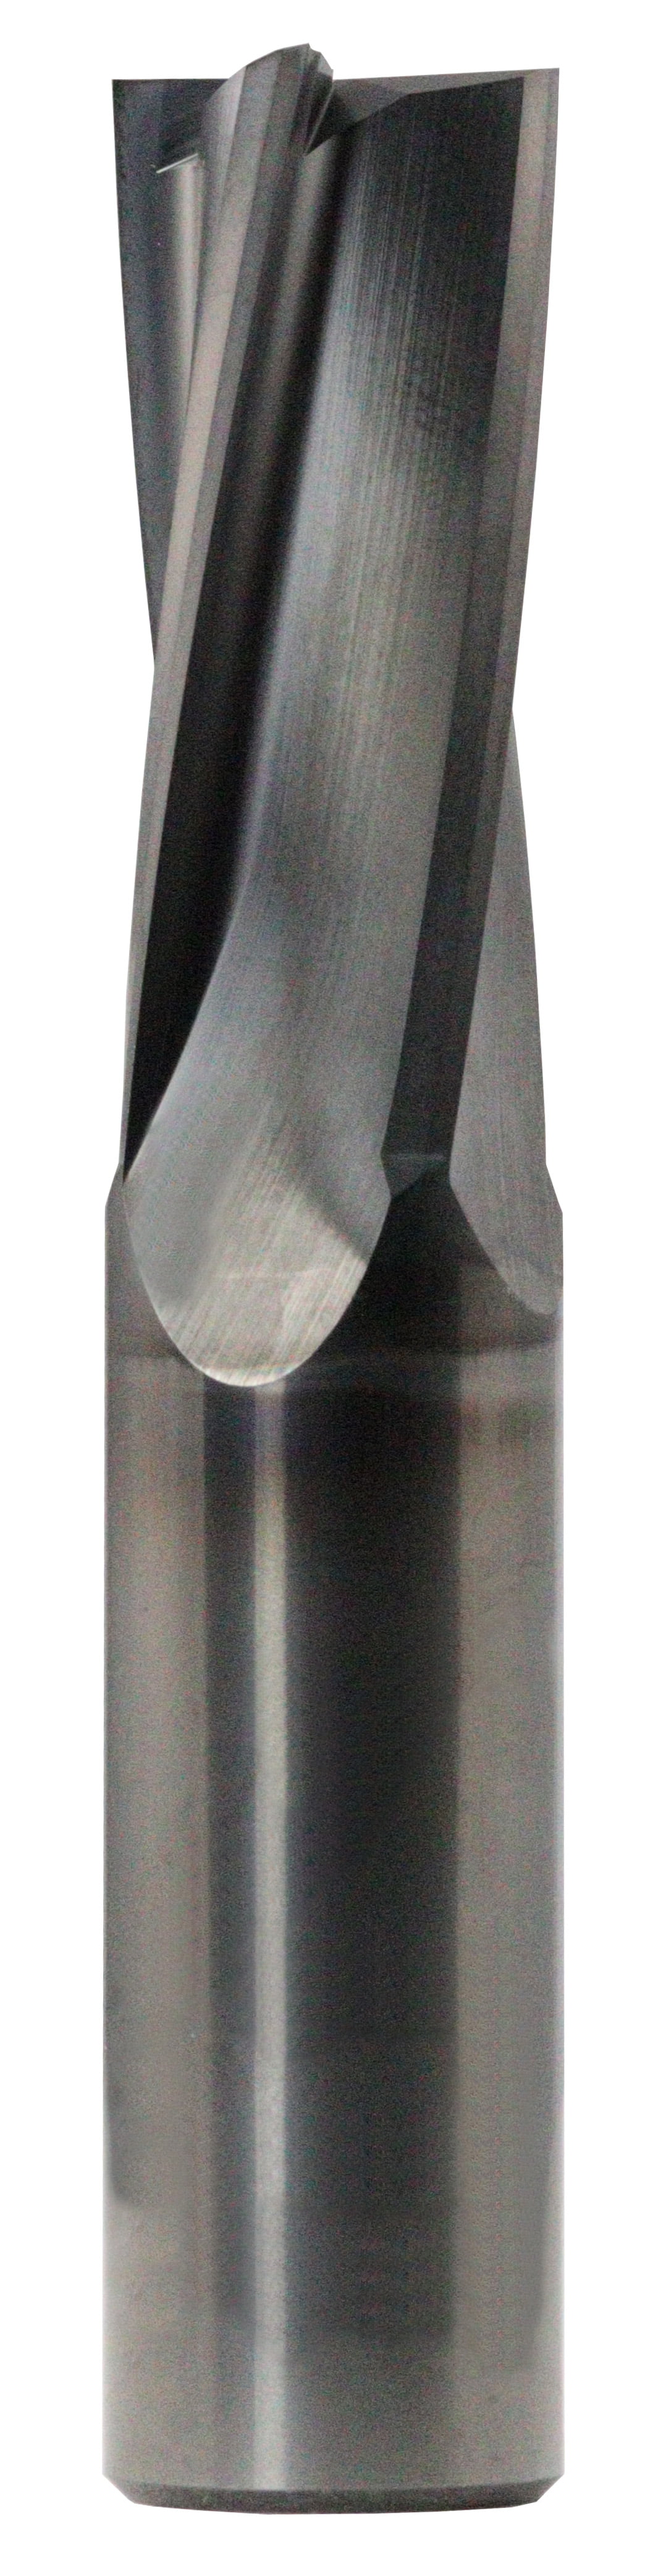 10.00mm Dia, 4 Flute, Square End End Mill - 83060